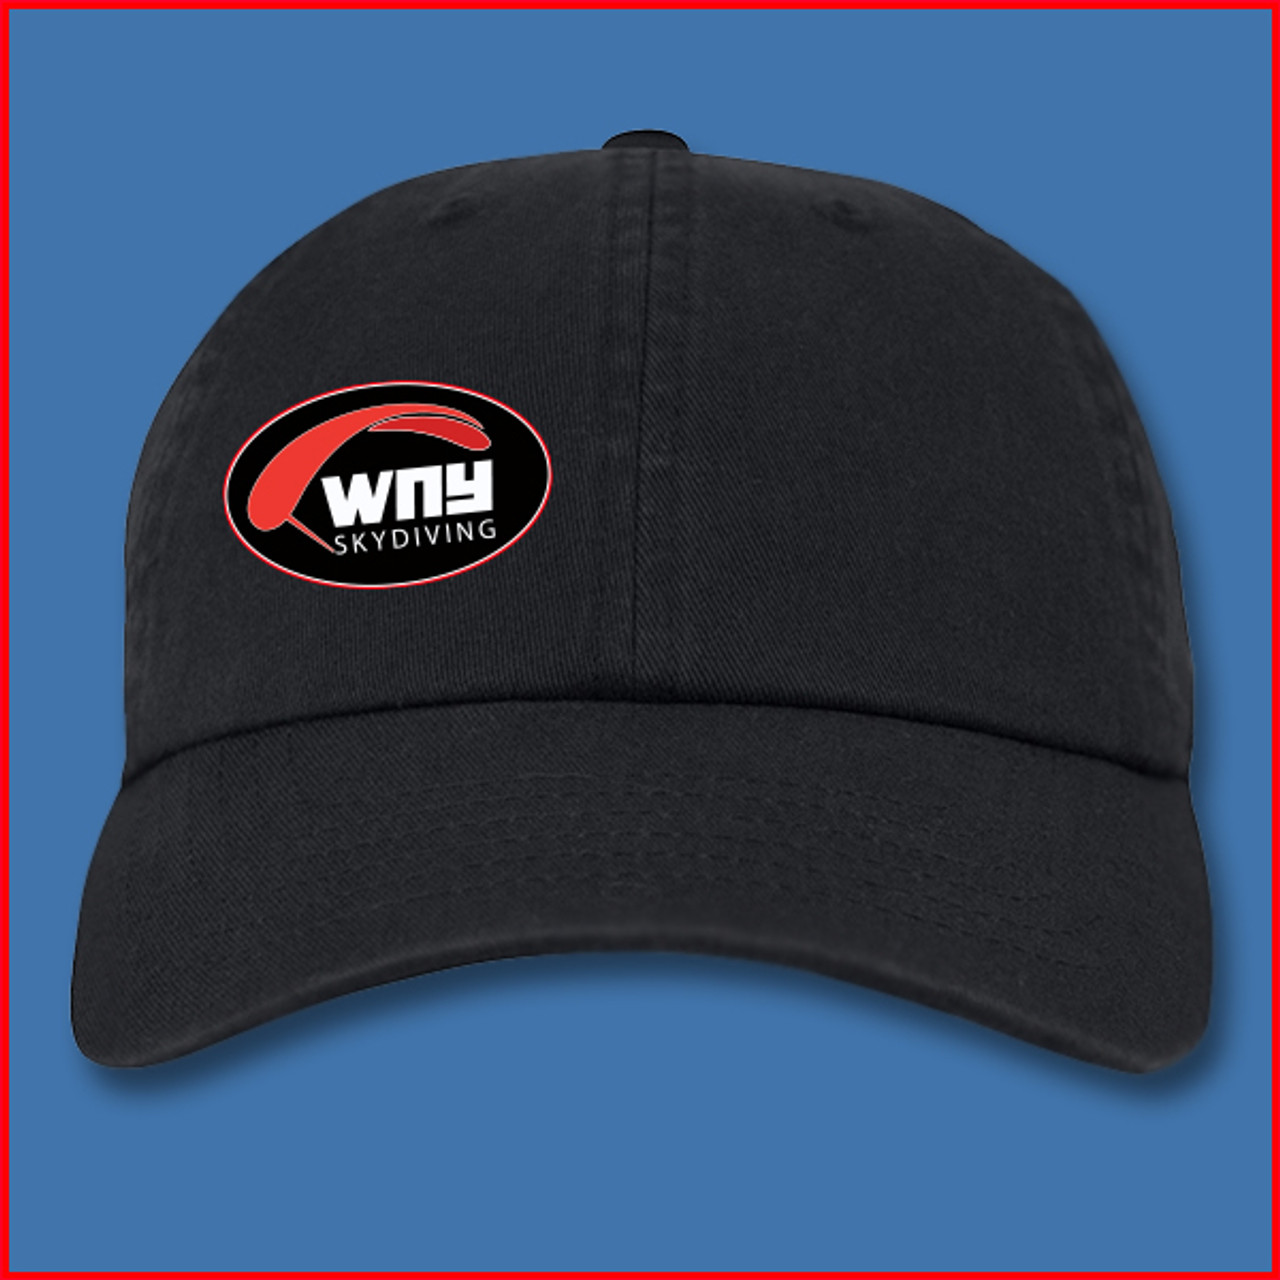 WNY Skydiving Champion Classic Washed Twill Cap